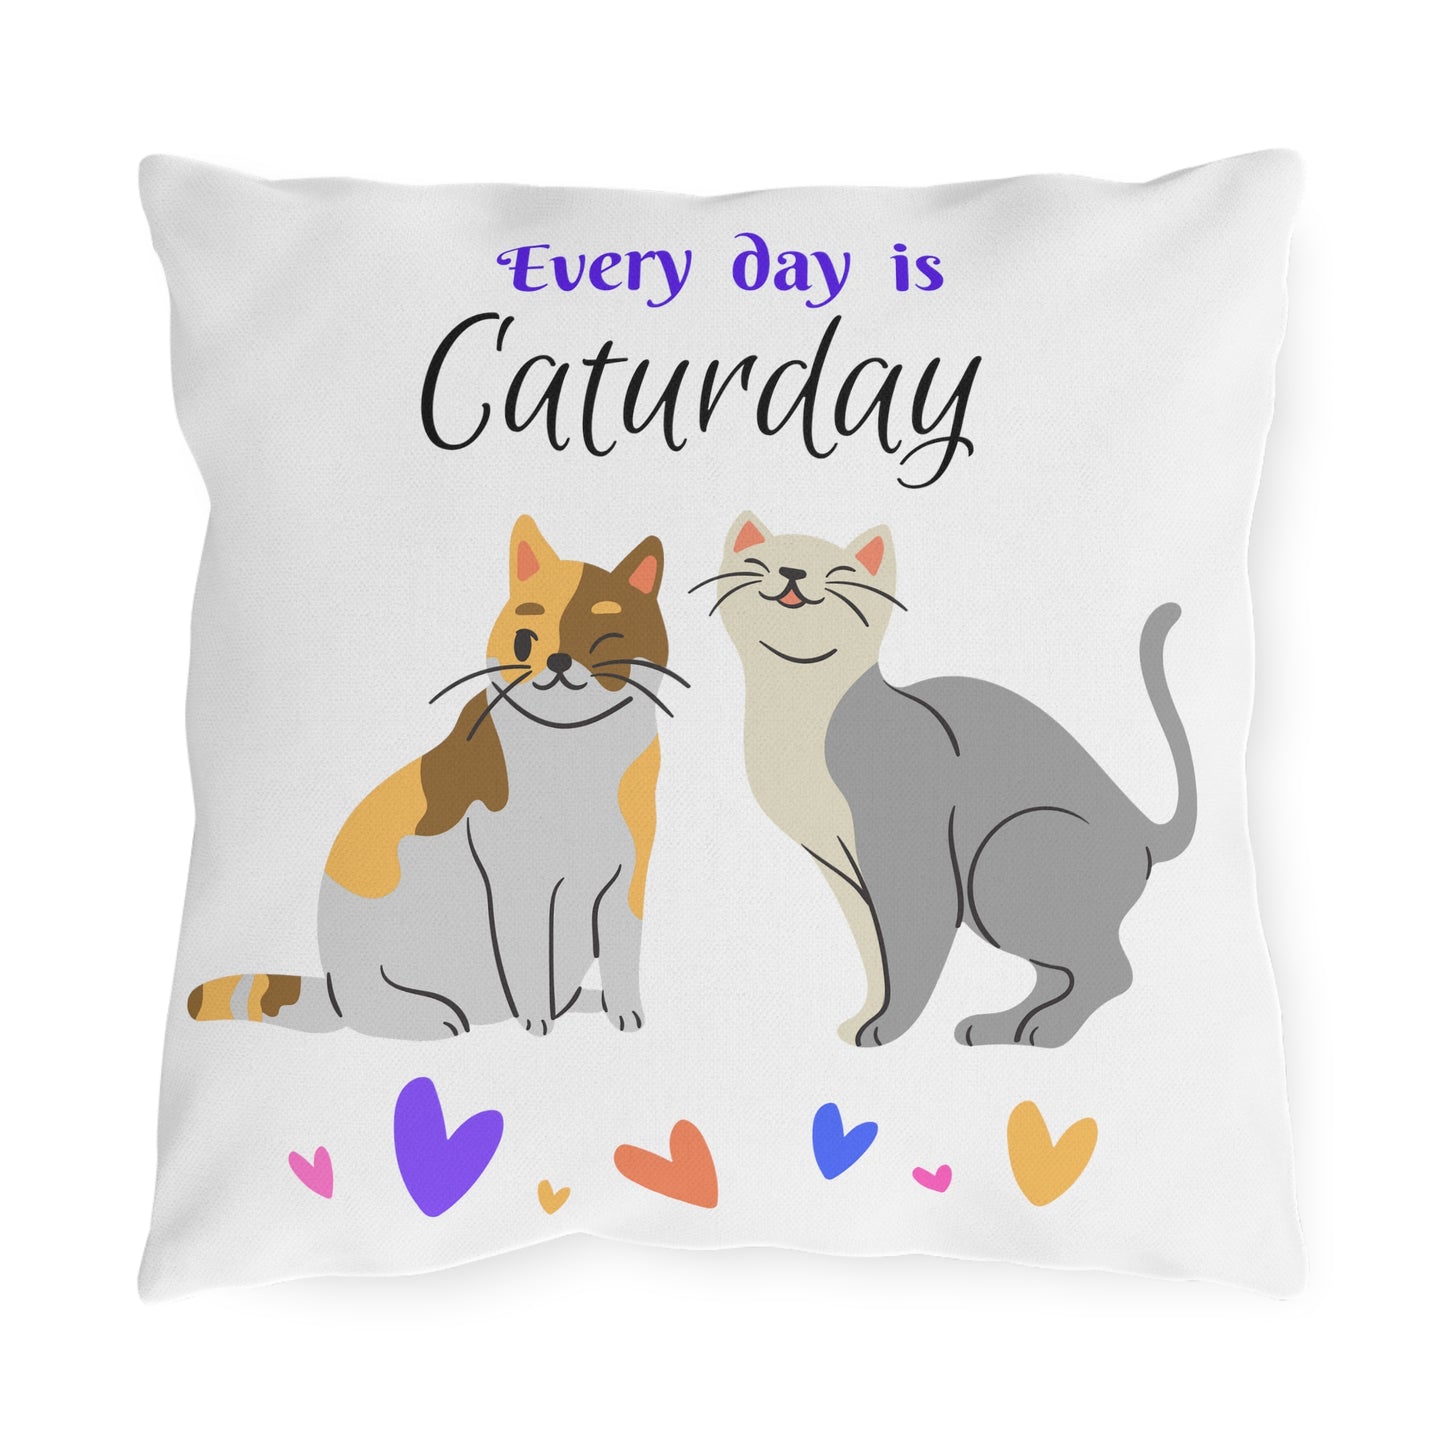 Pet-Lover Patio Pillow, "Every day is Caturday" Design, UV- & Mildew-Resistant